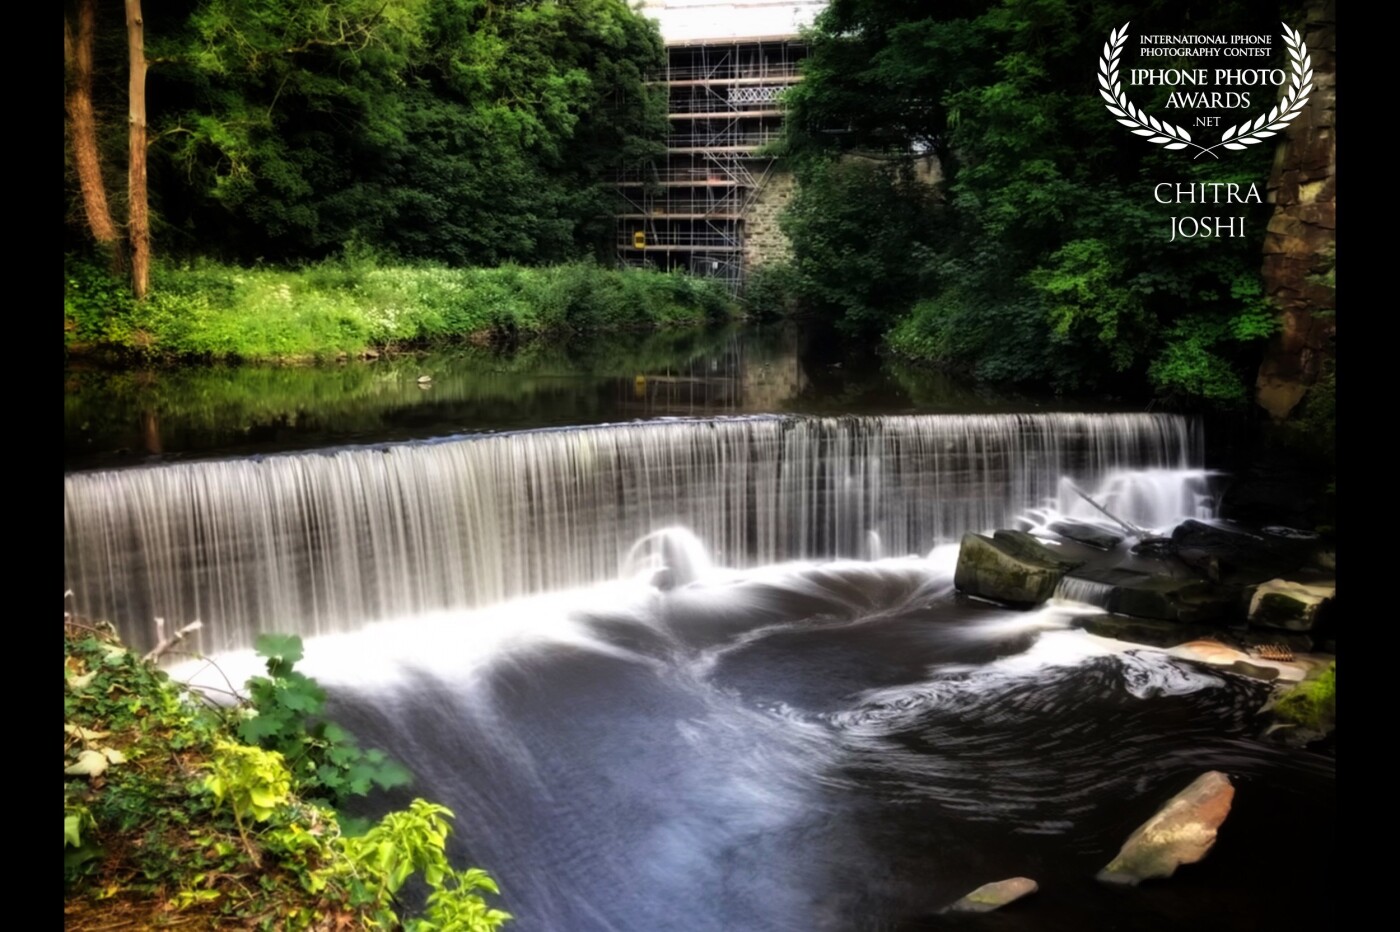 This photo was my first experiment with a long exposure shot from iPhone and I totally loved the water swirls. A beautiful waterfall at Millennium Walkway in Peak District, United Kingdom.